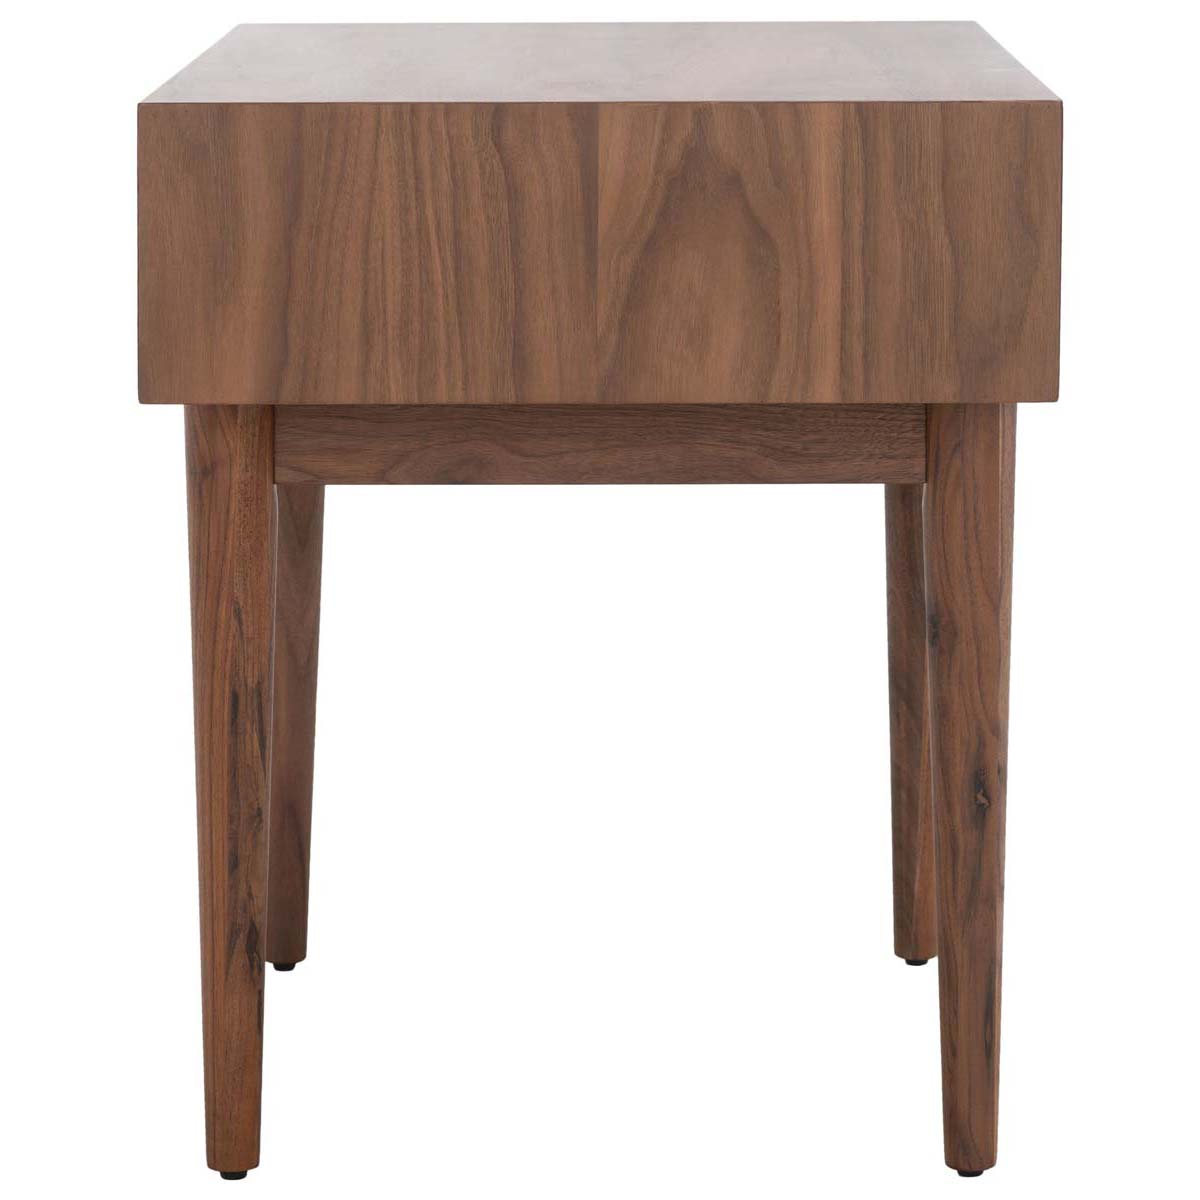 Safavieh Couture Ever 1 Drawer Nightstand